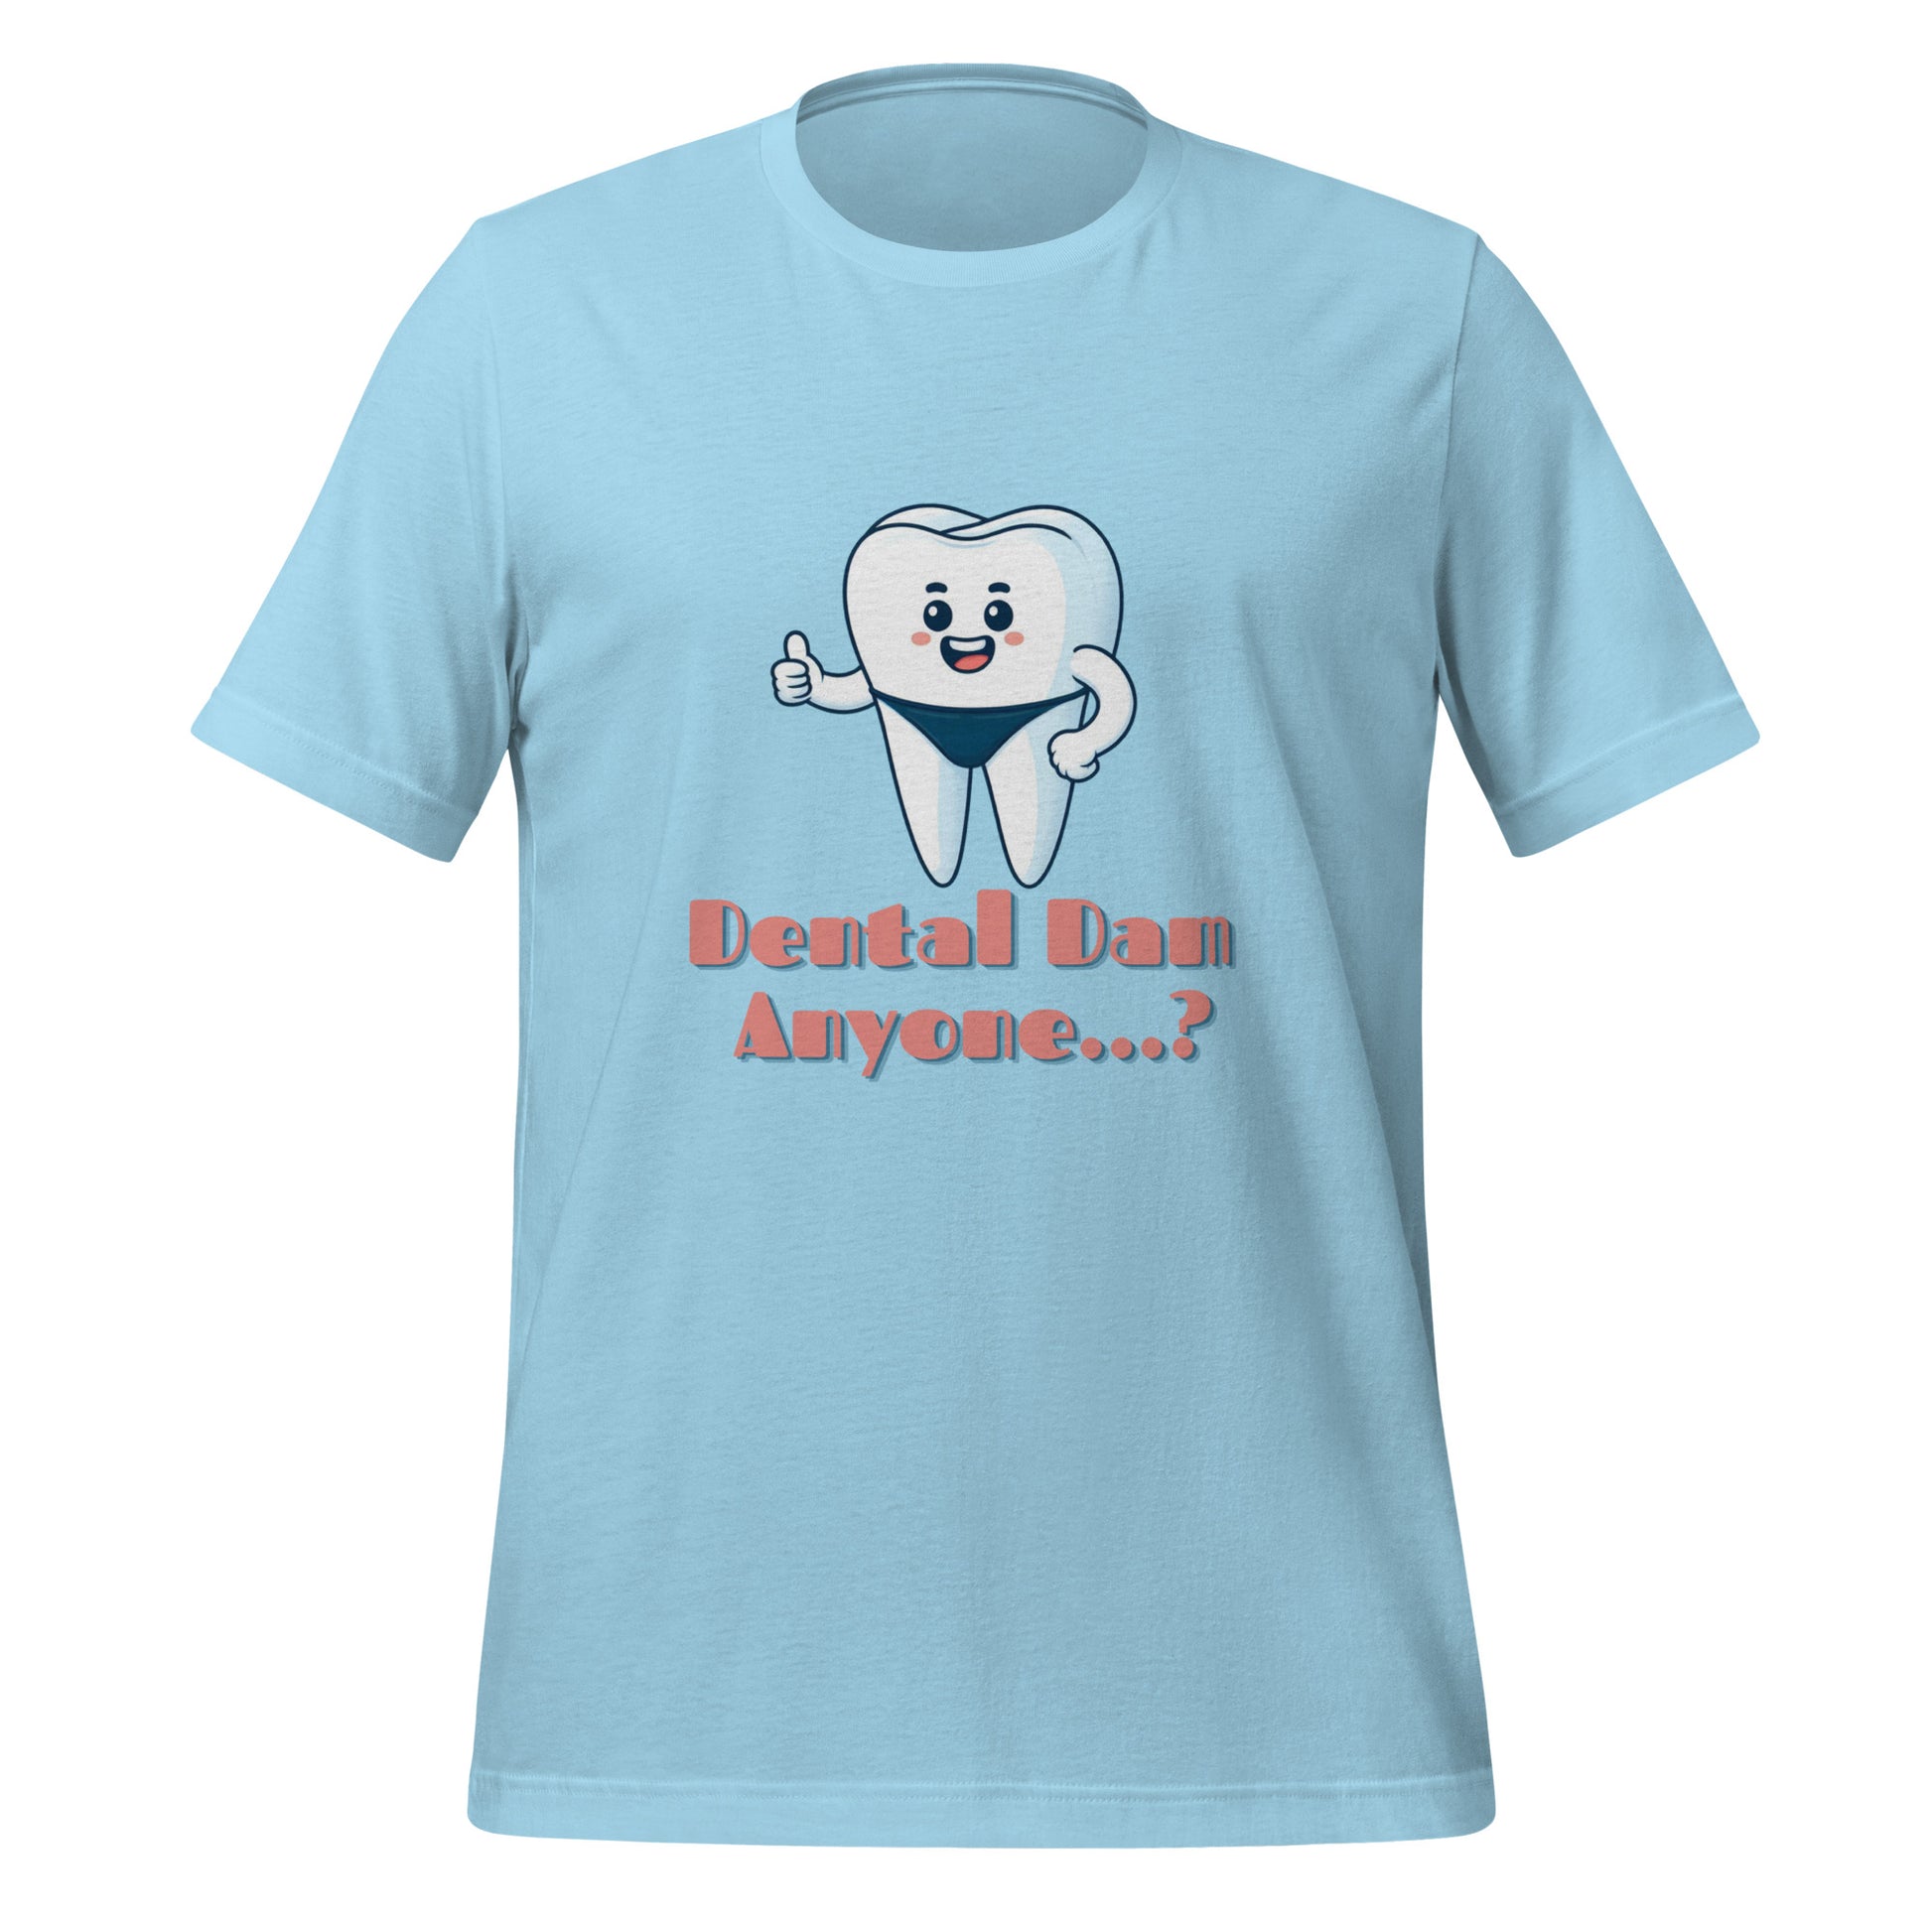 Funny dental shirt featuring a playful tooth character in a speedo with the text ‘Dental Dam Anyone?’, perfect for dentists, dental hygienists, and dental students who enjoy dental humor. This dental shirt is a unique addition to any dental professional’s wardrobe, making it an ideal dental office shirt. Don’t miss out on our dental assistant shirts and dental hygiene shirts. Ocean blue color.